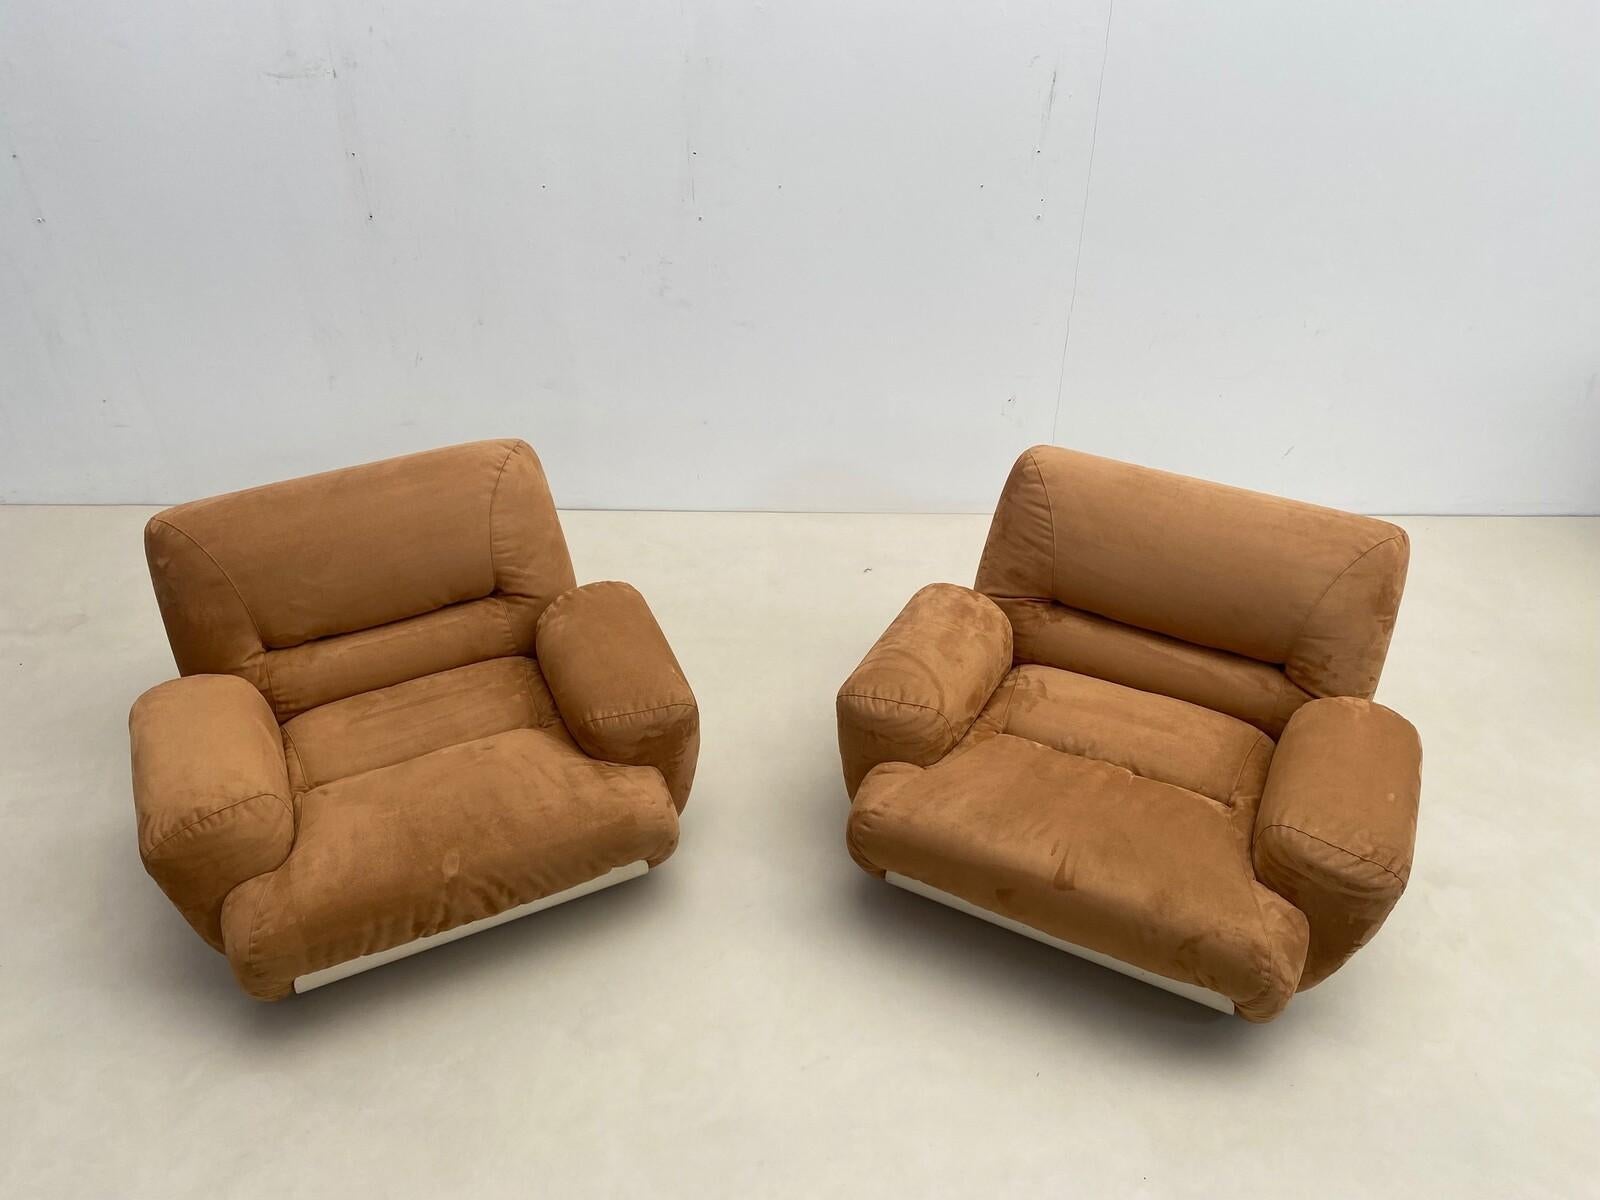 Suede Pair of Mid-Century Modern Nubuck Leather Lounge Chairs, Italy, 1970s For Sale